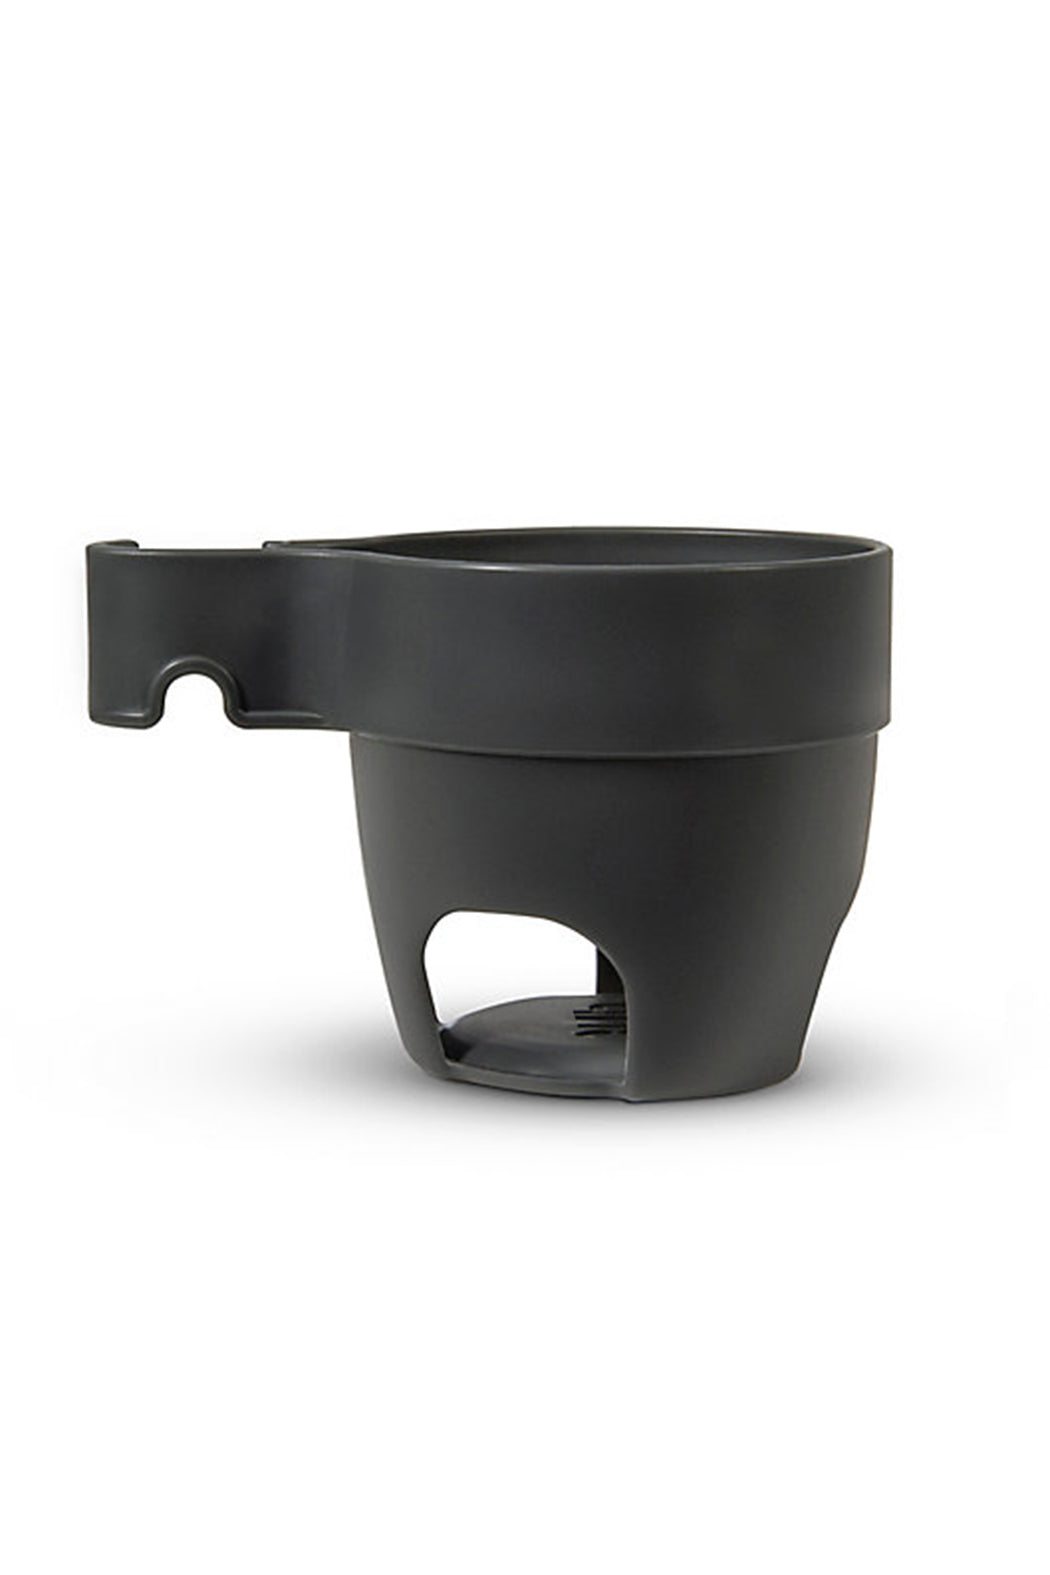 UPPAbaby Cup Holder for G-Link, G-Link V2, and G-Luxe (models 2013-2017)